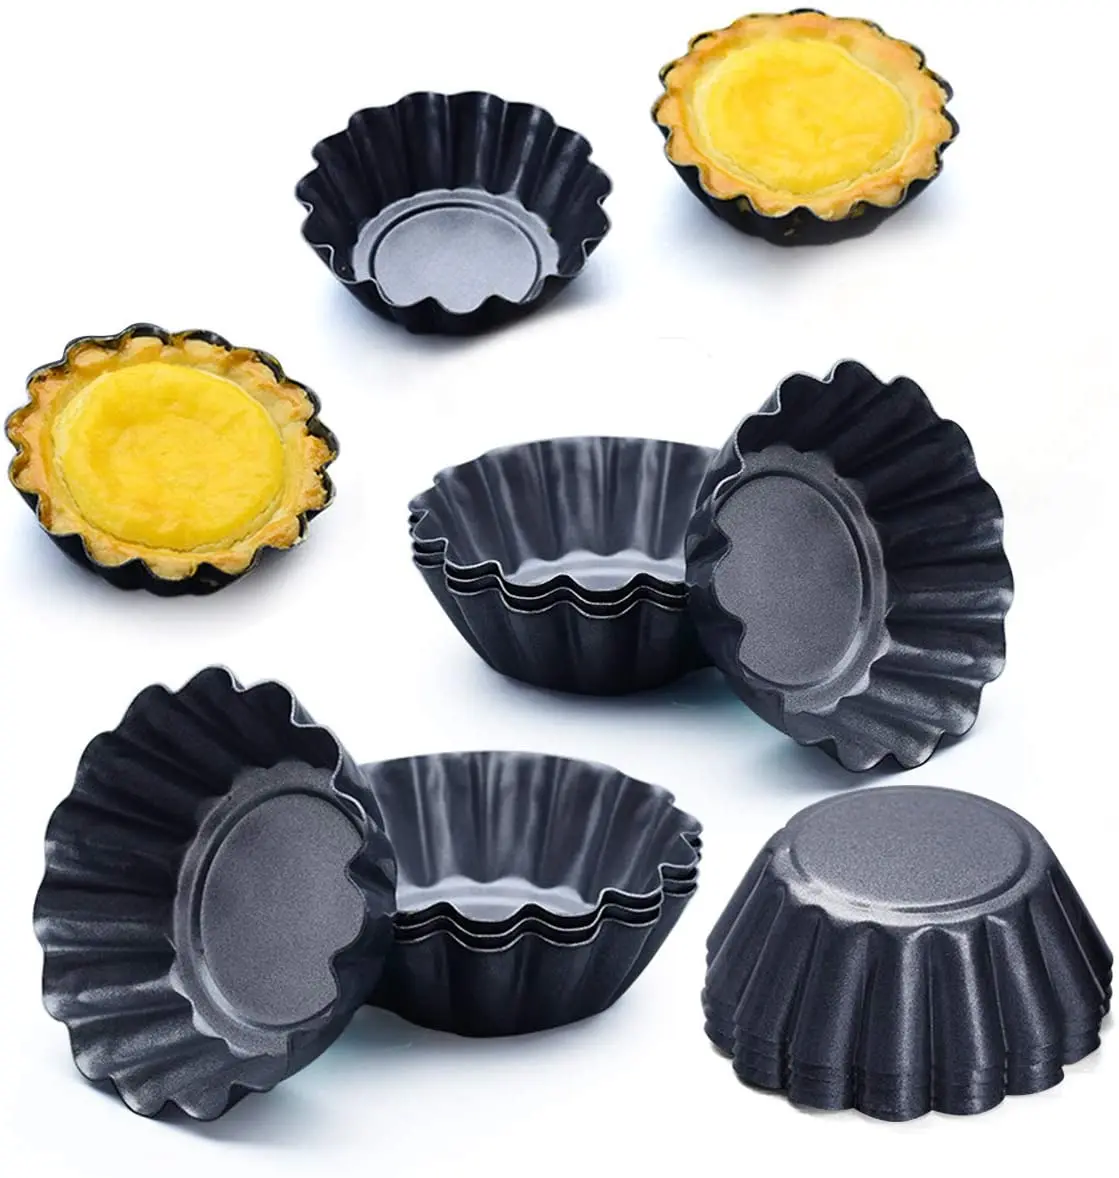 

Cupcake Baking Mold Reusable Metal Stainless Steel Tin Material Cake Mould Egg Tart Baking Mold Pastry Tools